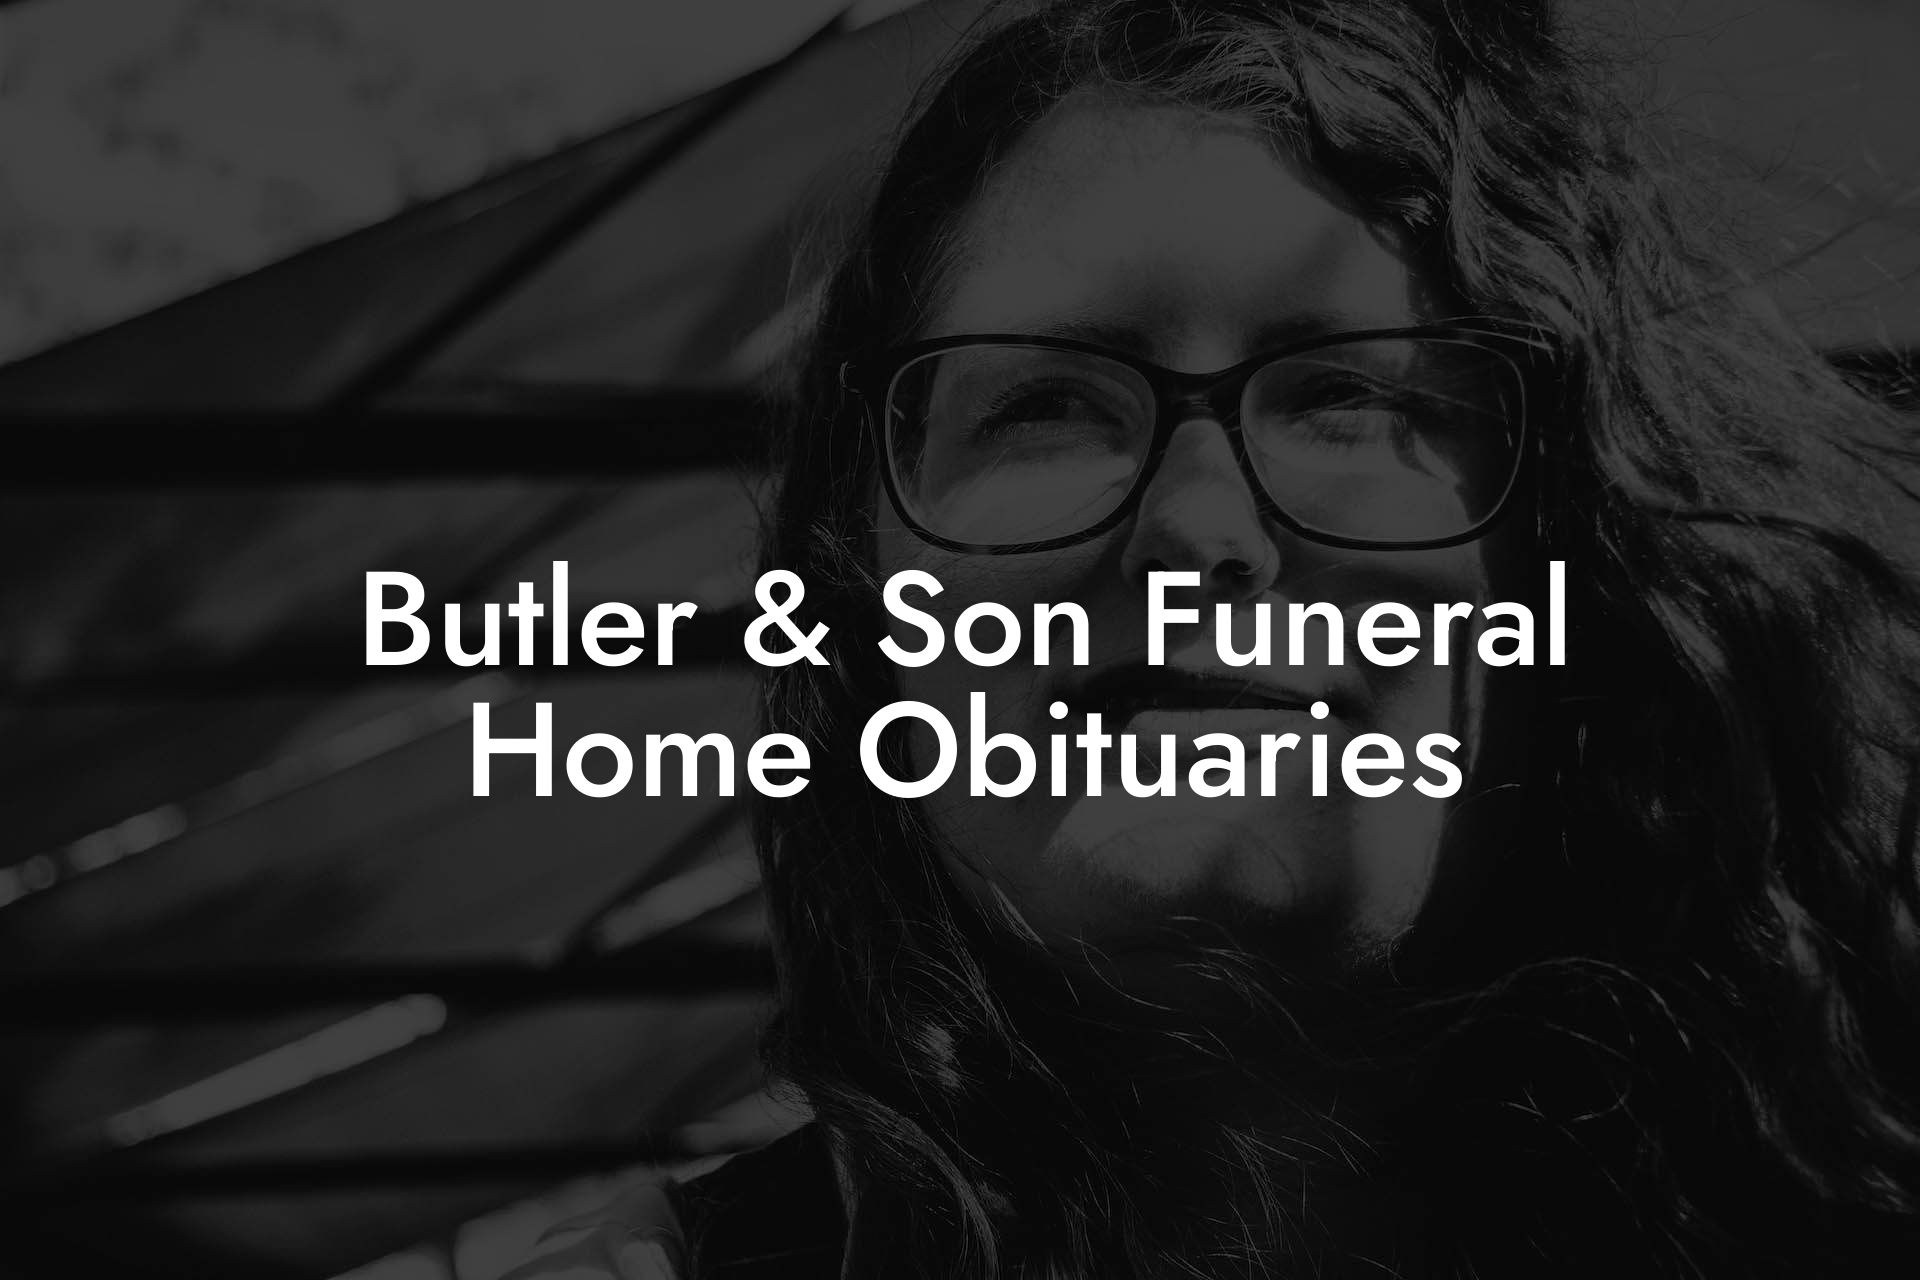 Butler & Son Funeral Home Obituaries